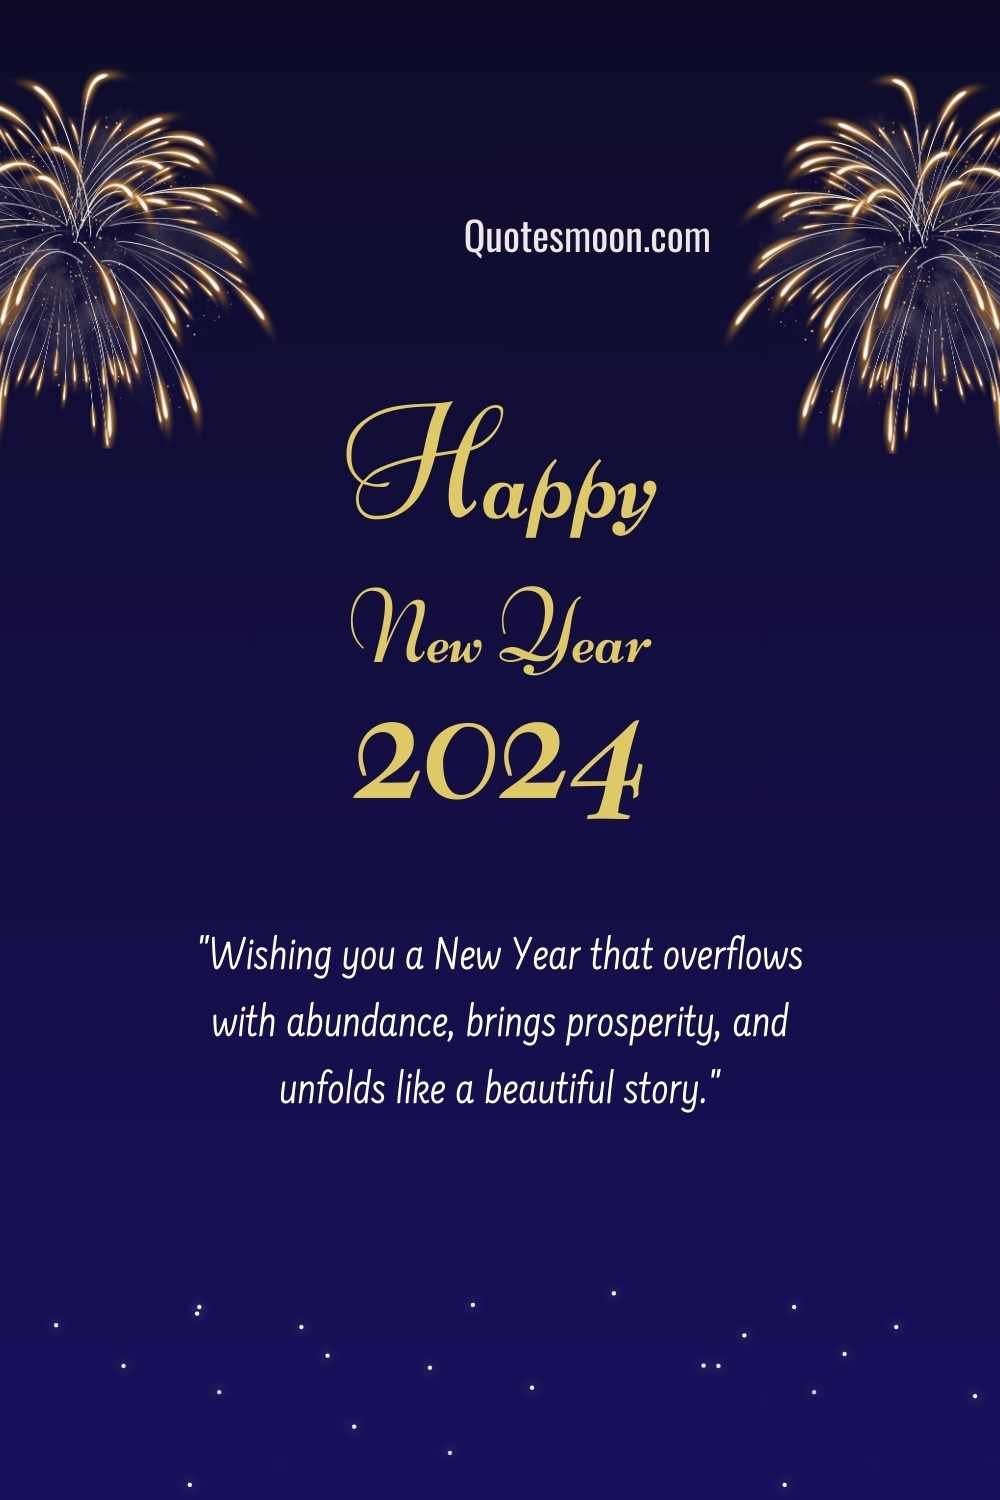 images Motivational and Inspiring Happy New Year Wishes